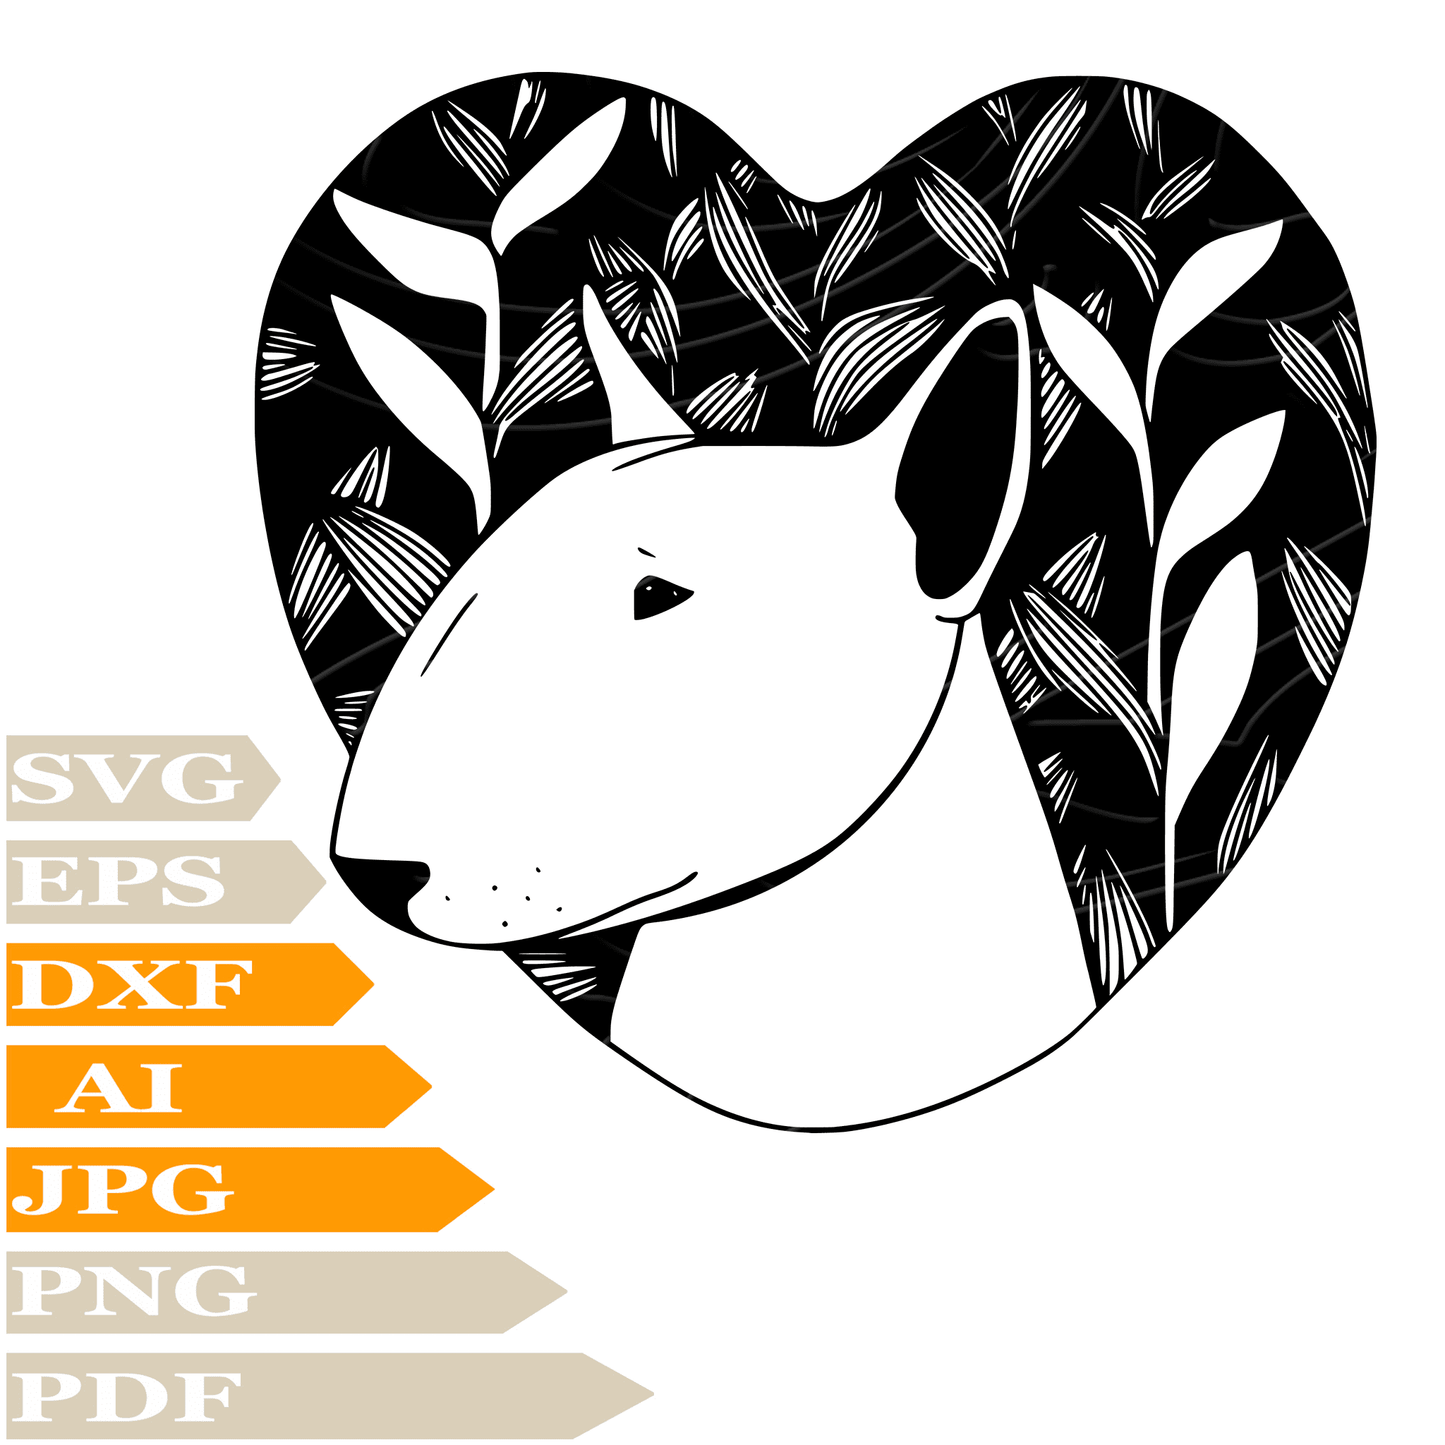 Bull Terrier SVG File, English Bull Terrier SVG Design, Dog English Bull Terrier SVG Cricut, Bull Terrier Digital Vector, PNG, Image Cut, Clipart, Cut File, Print, Decal, Shirt, Silhouette